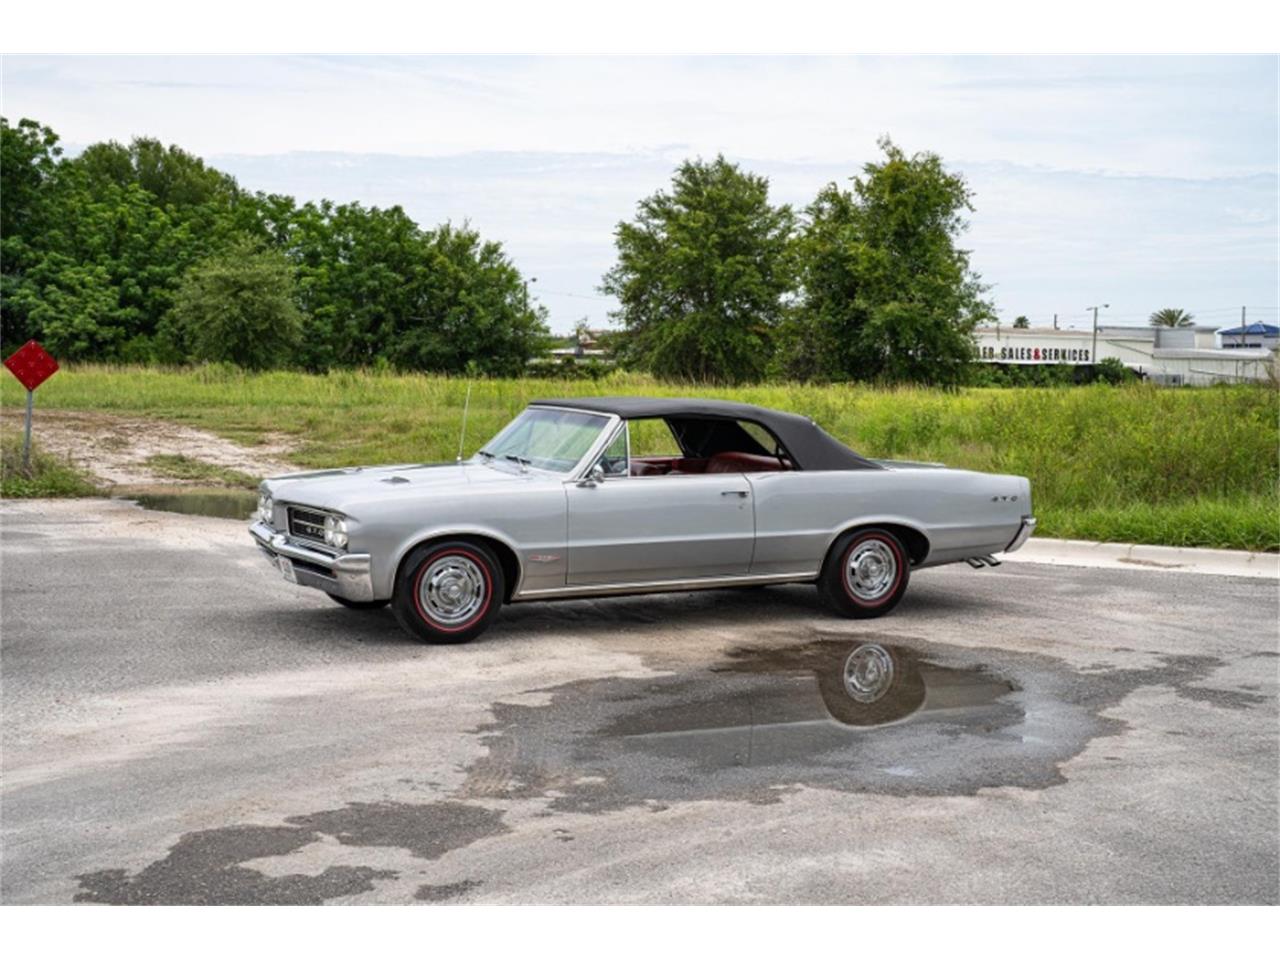 For Sale: 1964 Pontiac GTO in Hobart, Indiana for sale in Hobart, IN